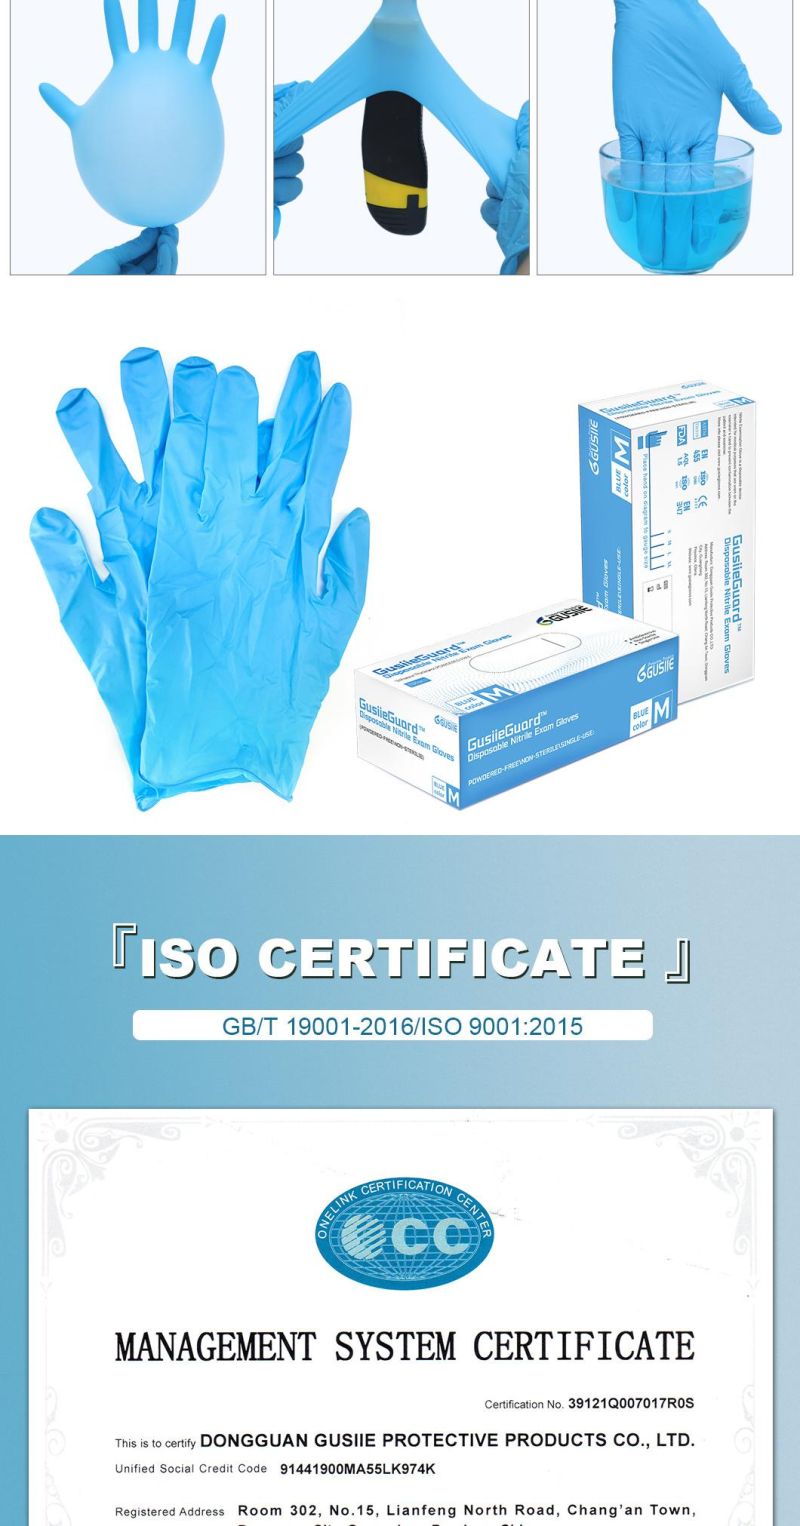 Gusiie Cheap Price 100PCS Box Disposable Blue Nitrile Medical Examination Large Gloves